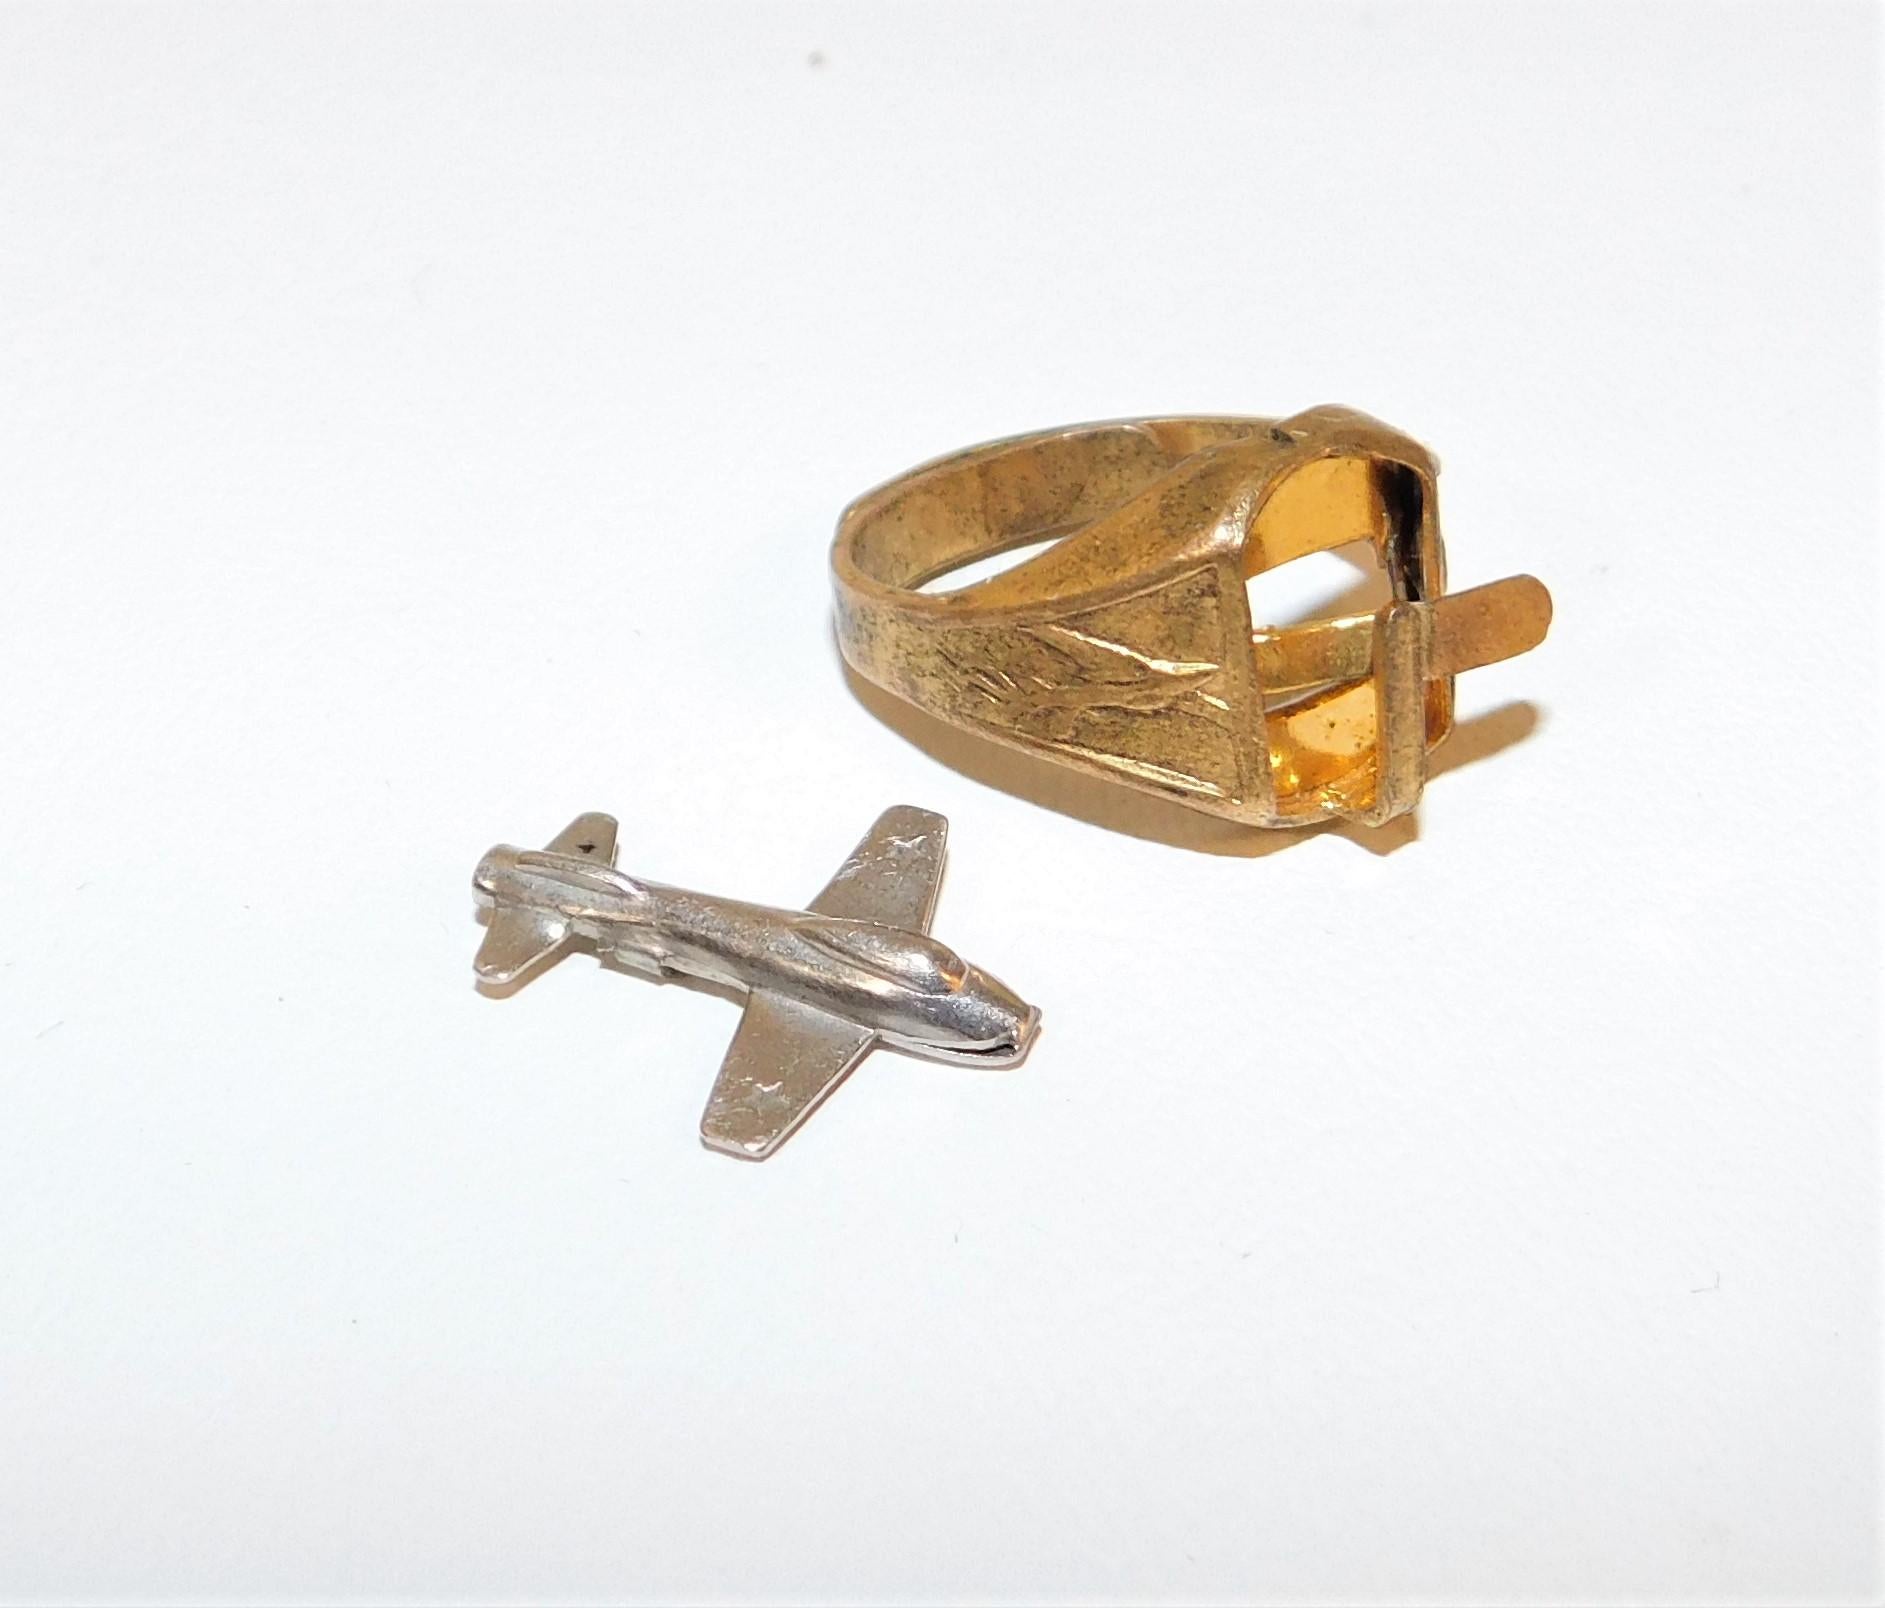 Rare 1948 Kellogg's Pep whole wheat cereal jet ring as advertised on the Superman radio program. The ring with adjustable 24-karat gold plate band has airplane image on each side. Top has nickel finish luster metal spring-loaded airplane which